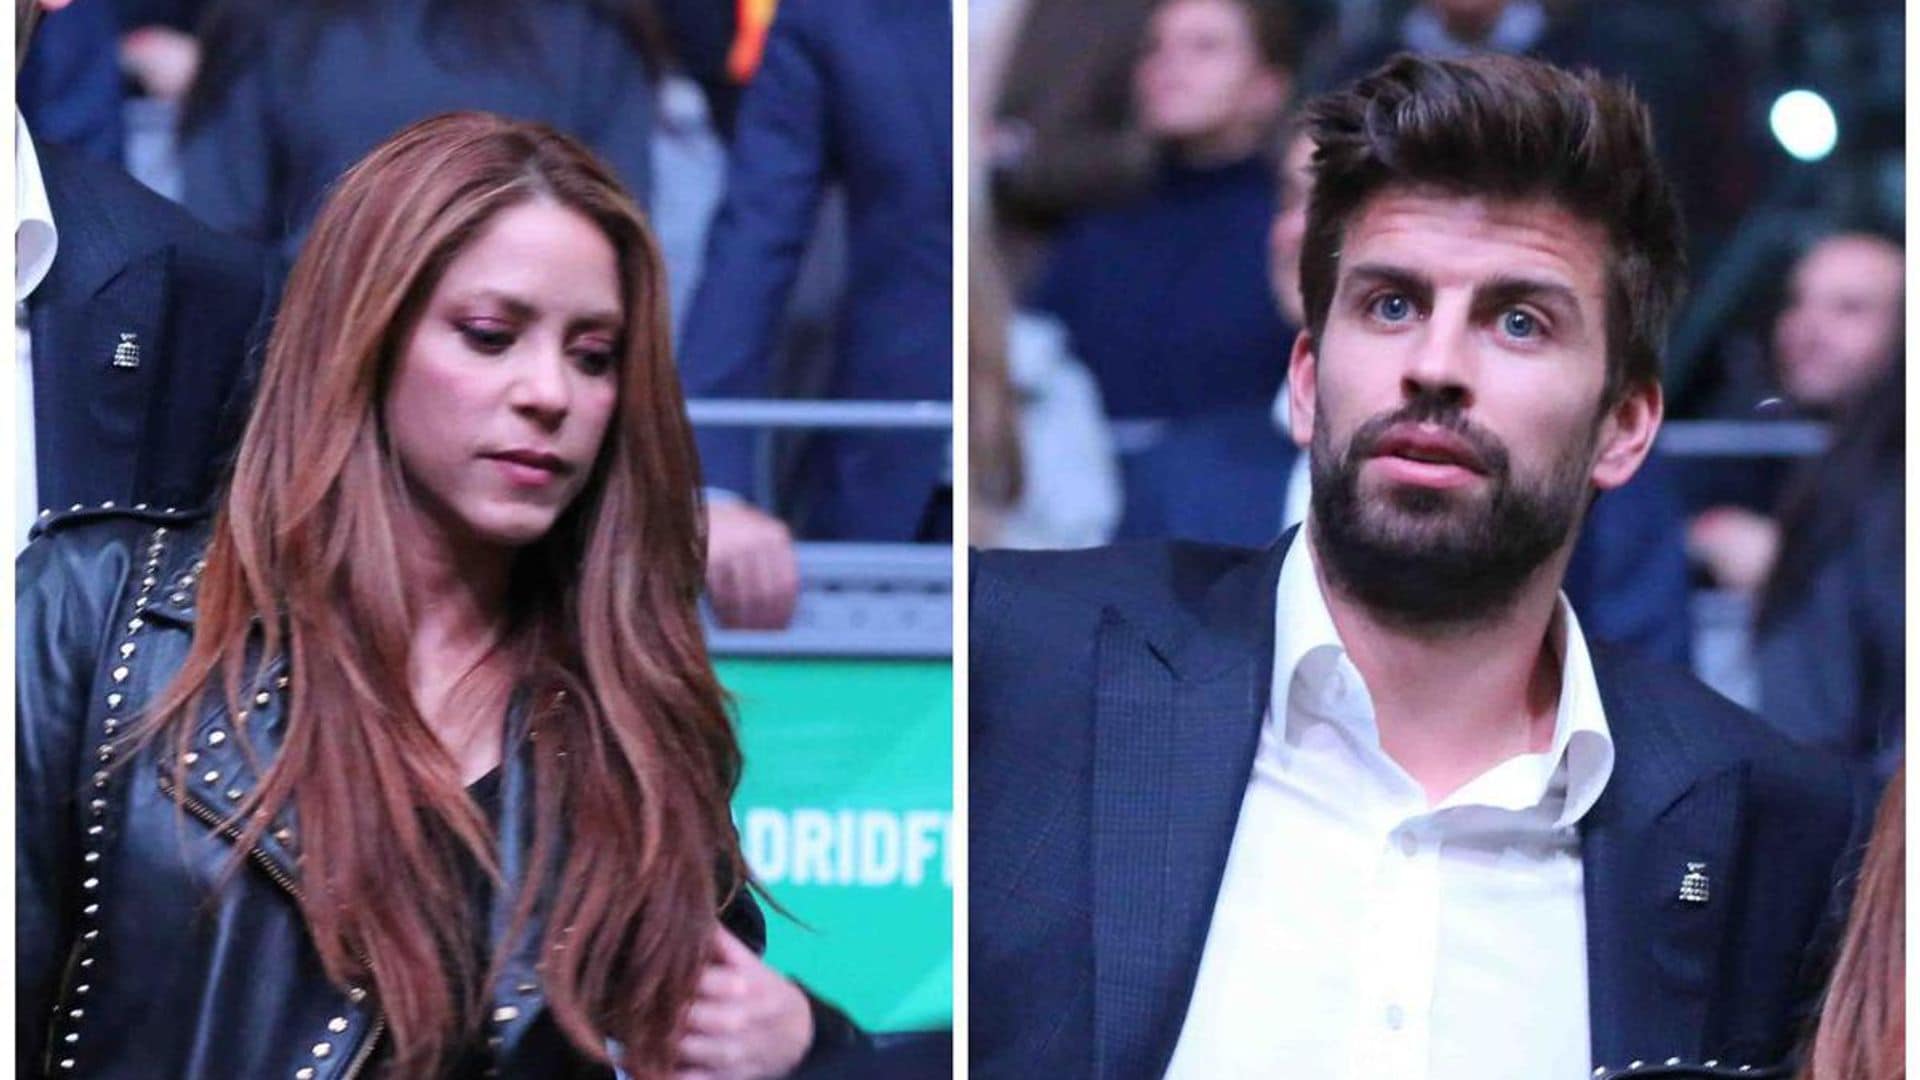 Shakira and Piqué will reportedly sell their Barcelona properties